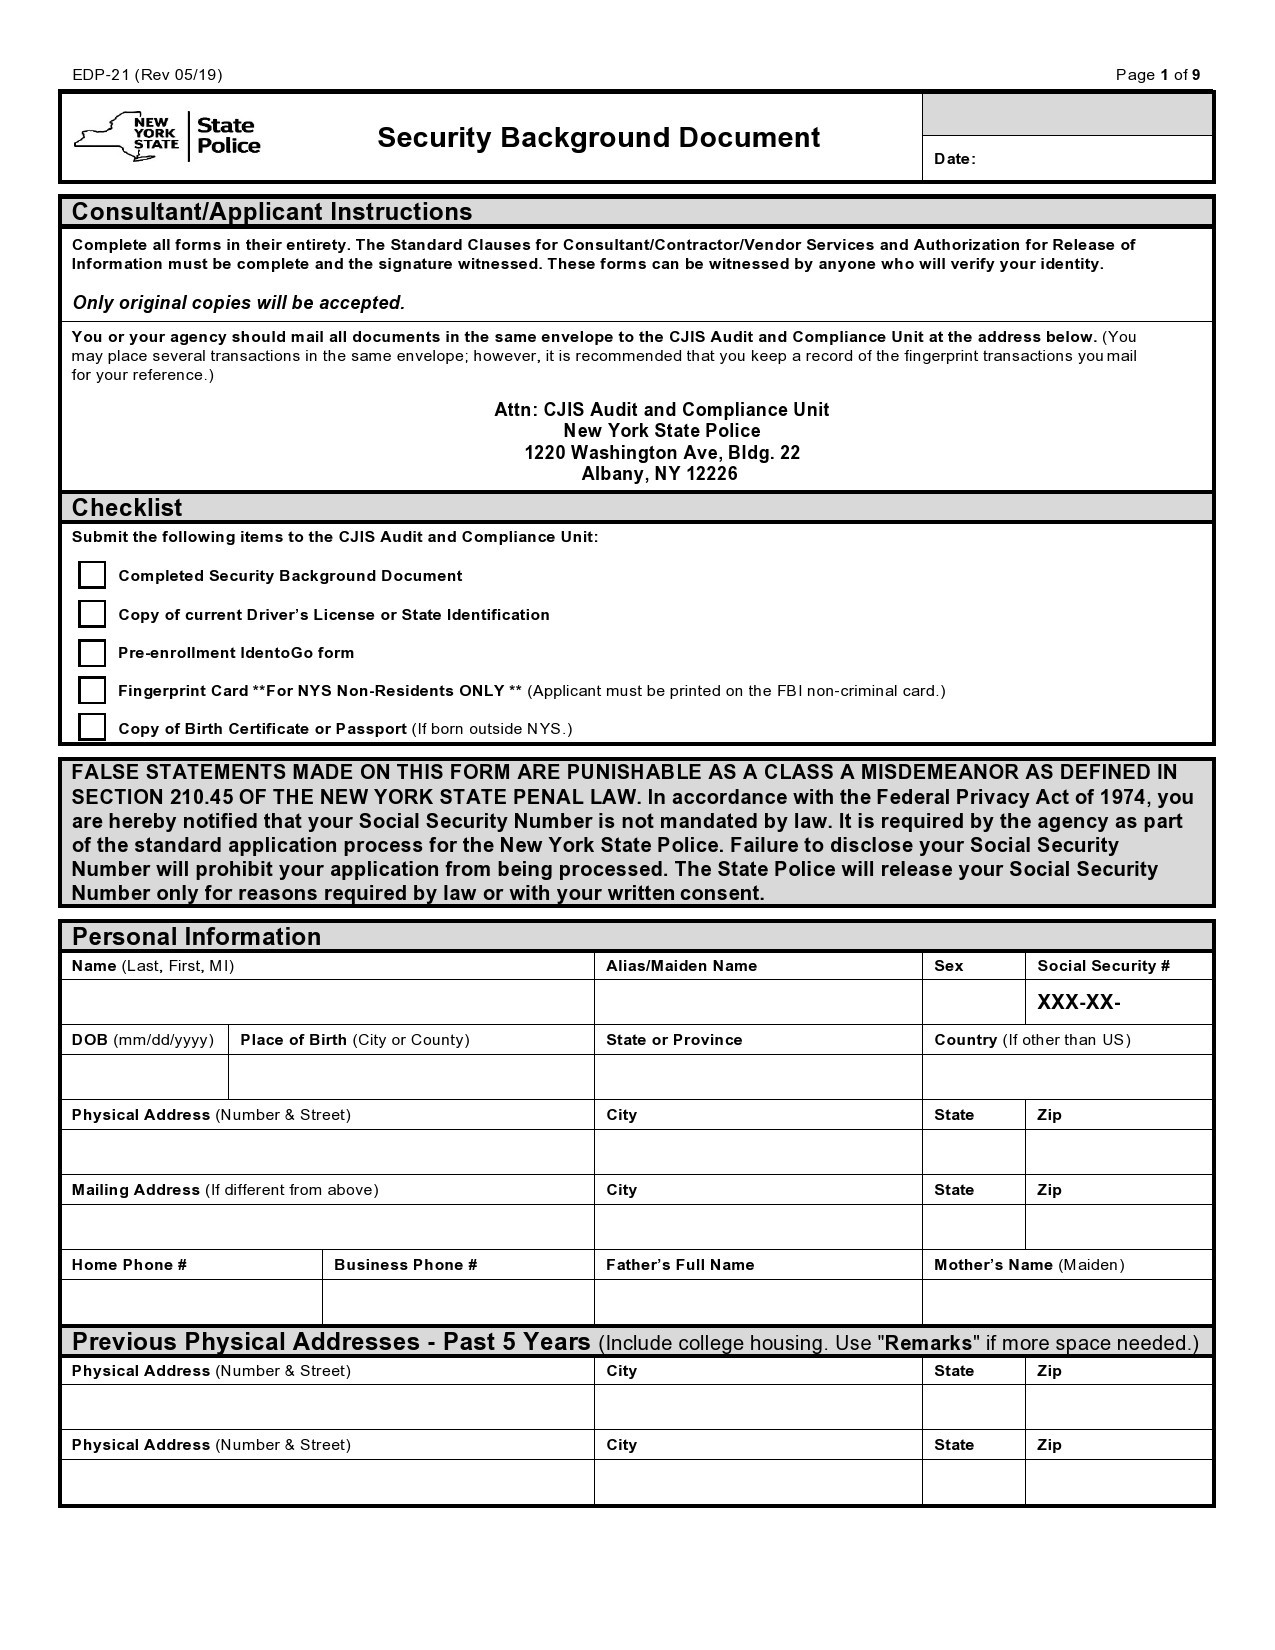 printable-employment-background-check-form-printable-forms-free-online